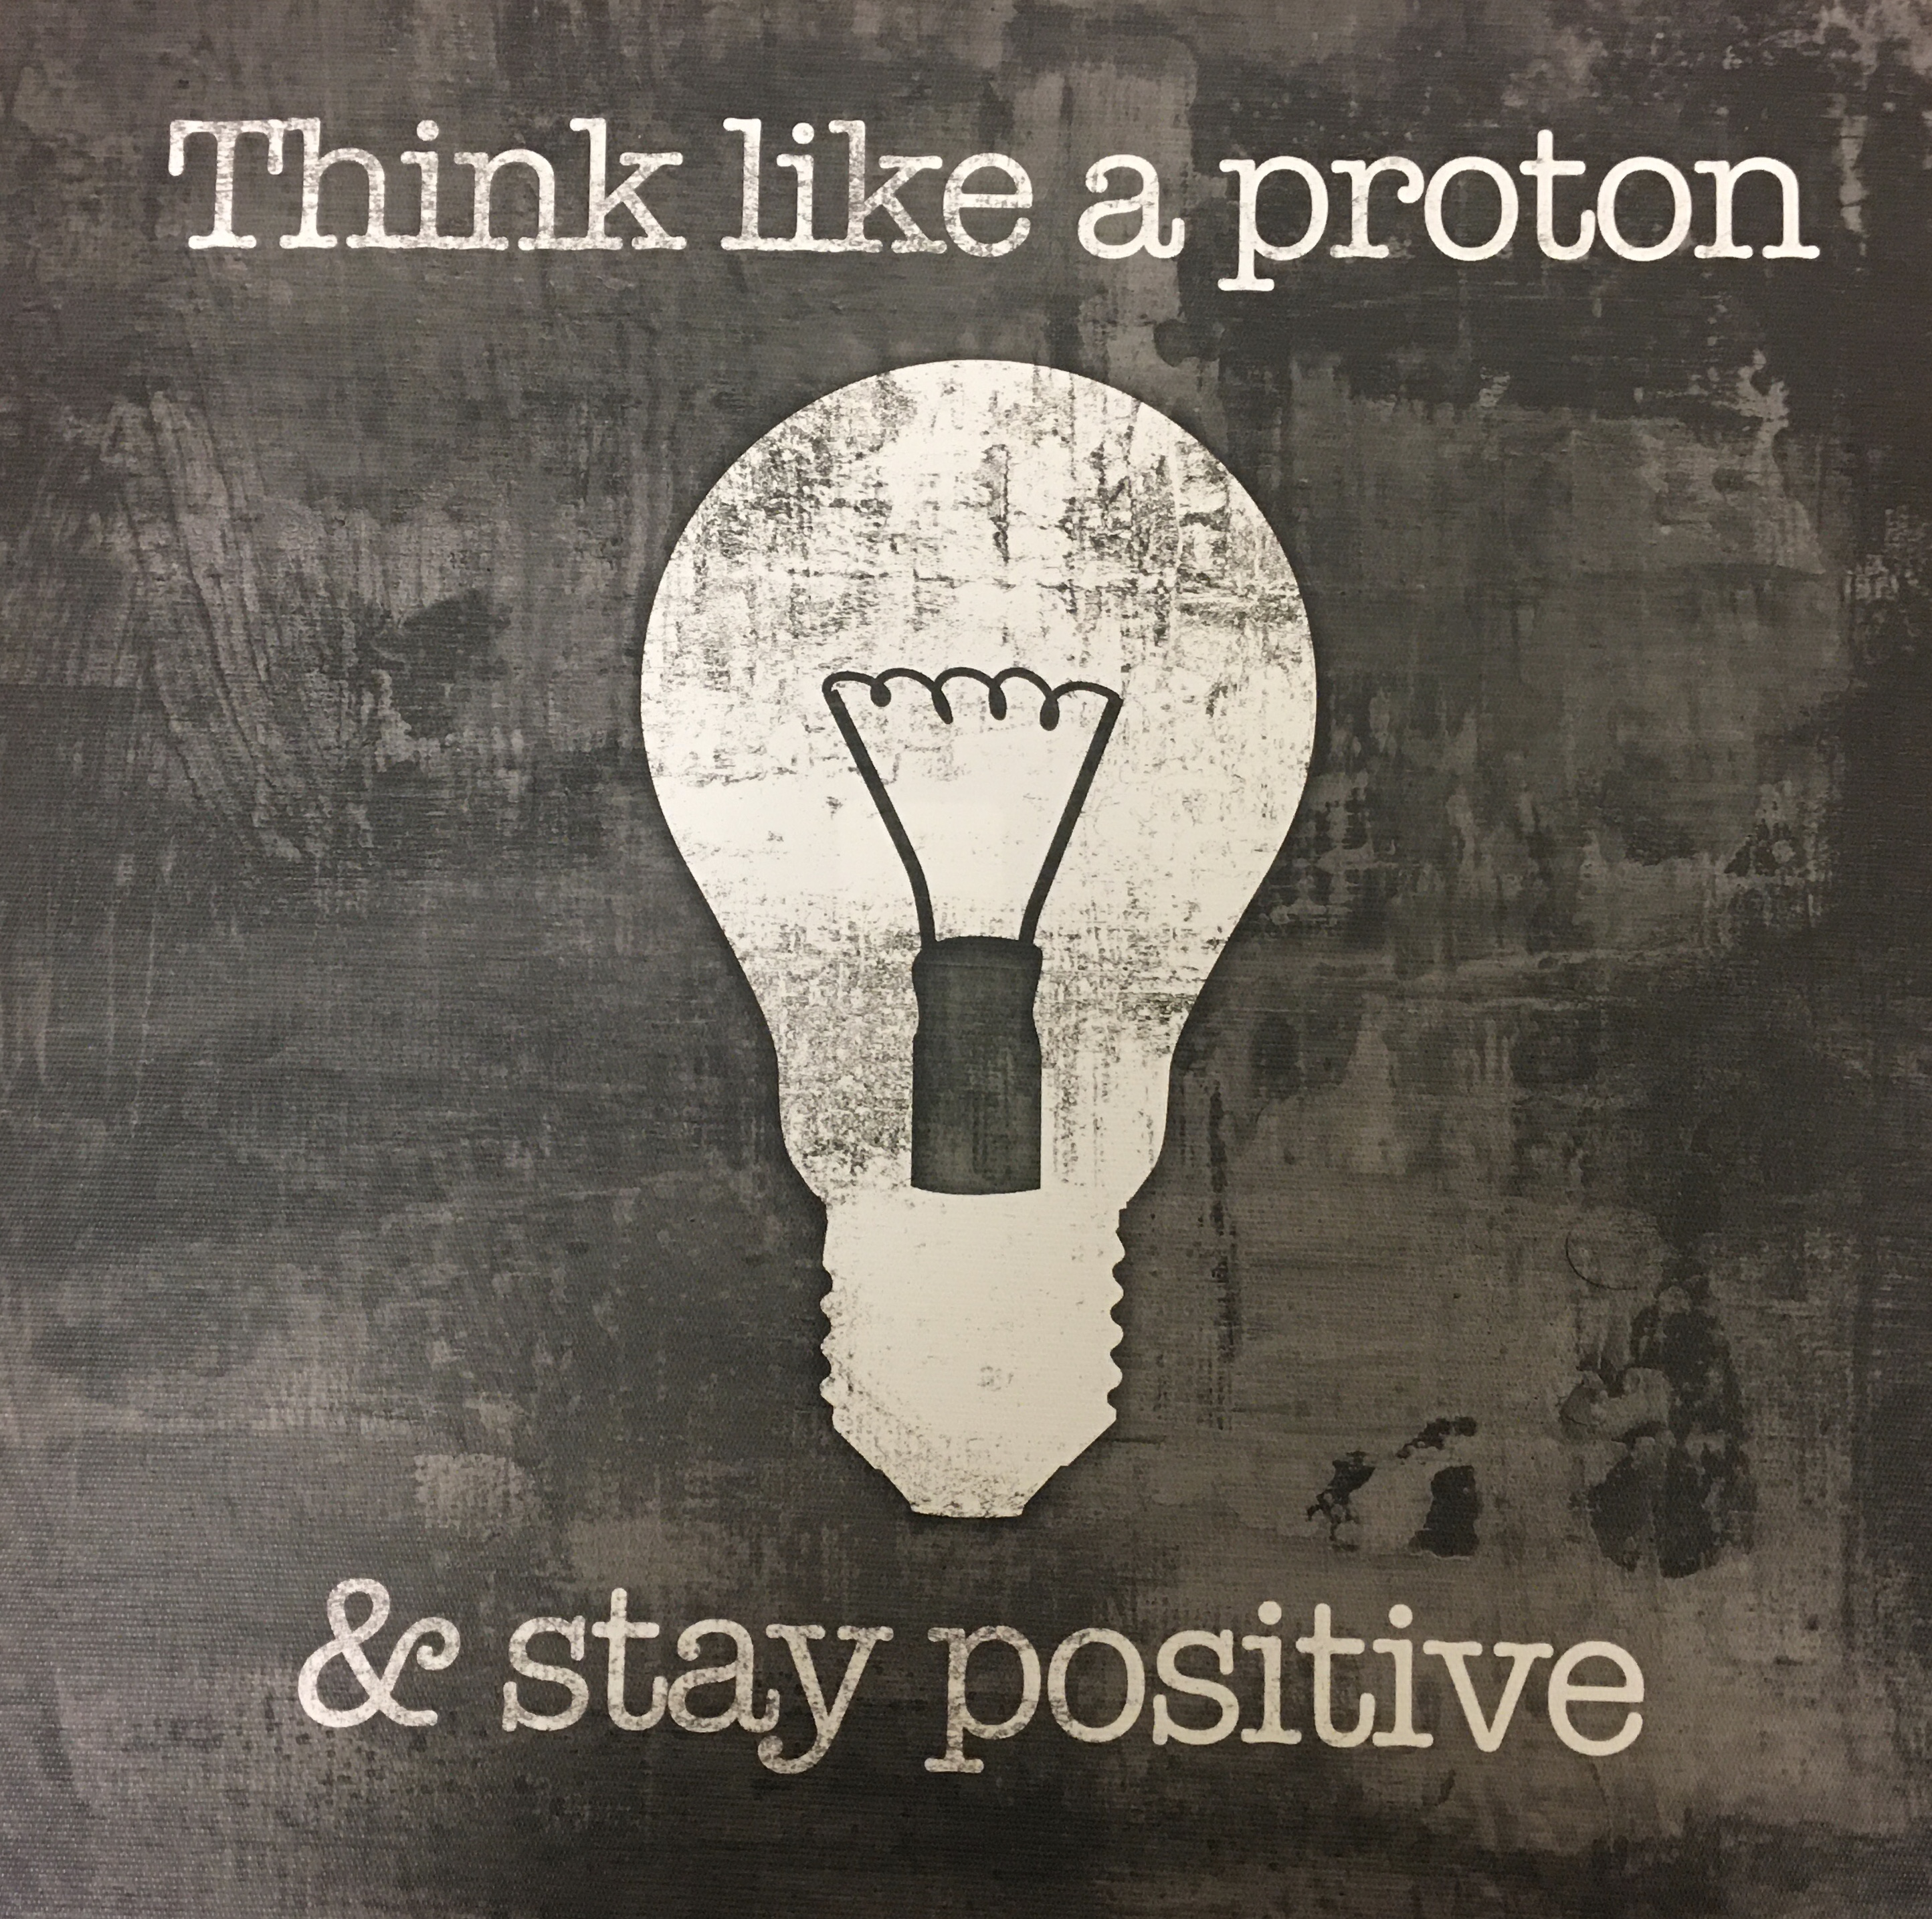 Graphic of a lightbulb that says "think like a proton and stay positive."